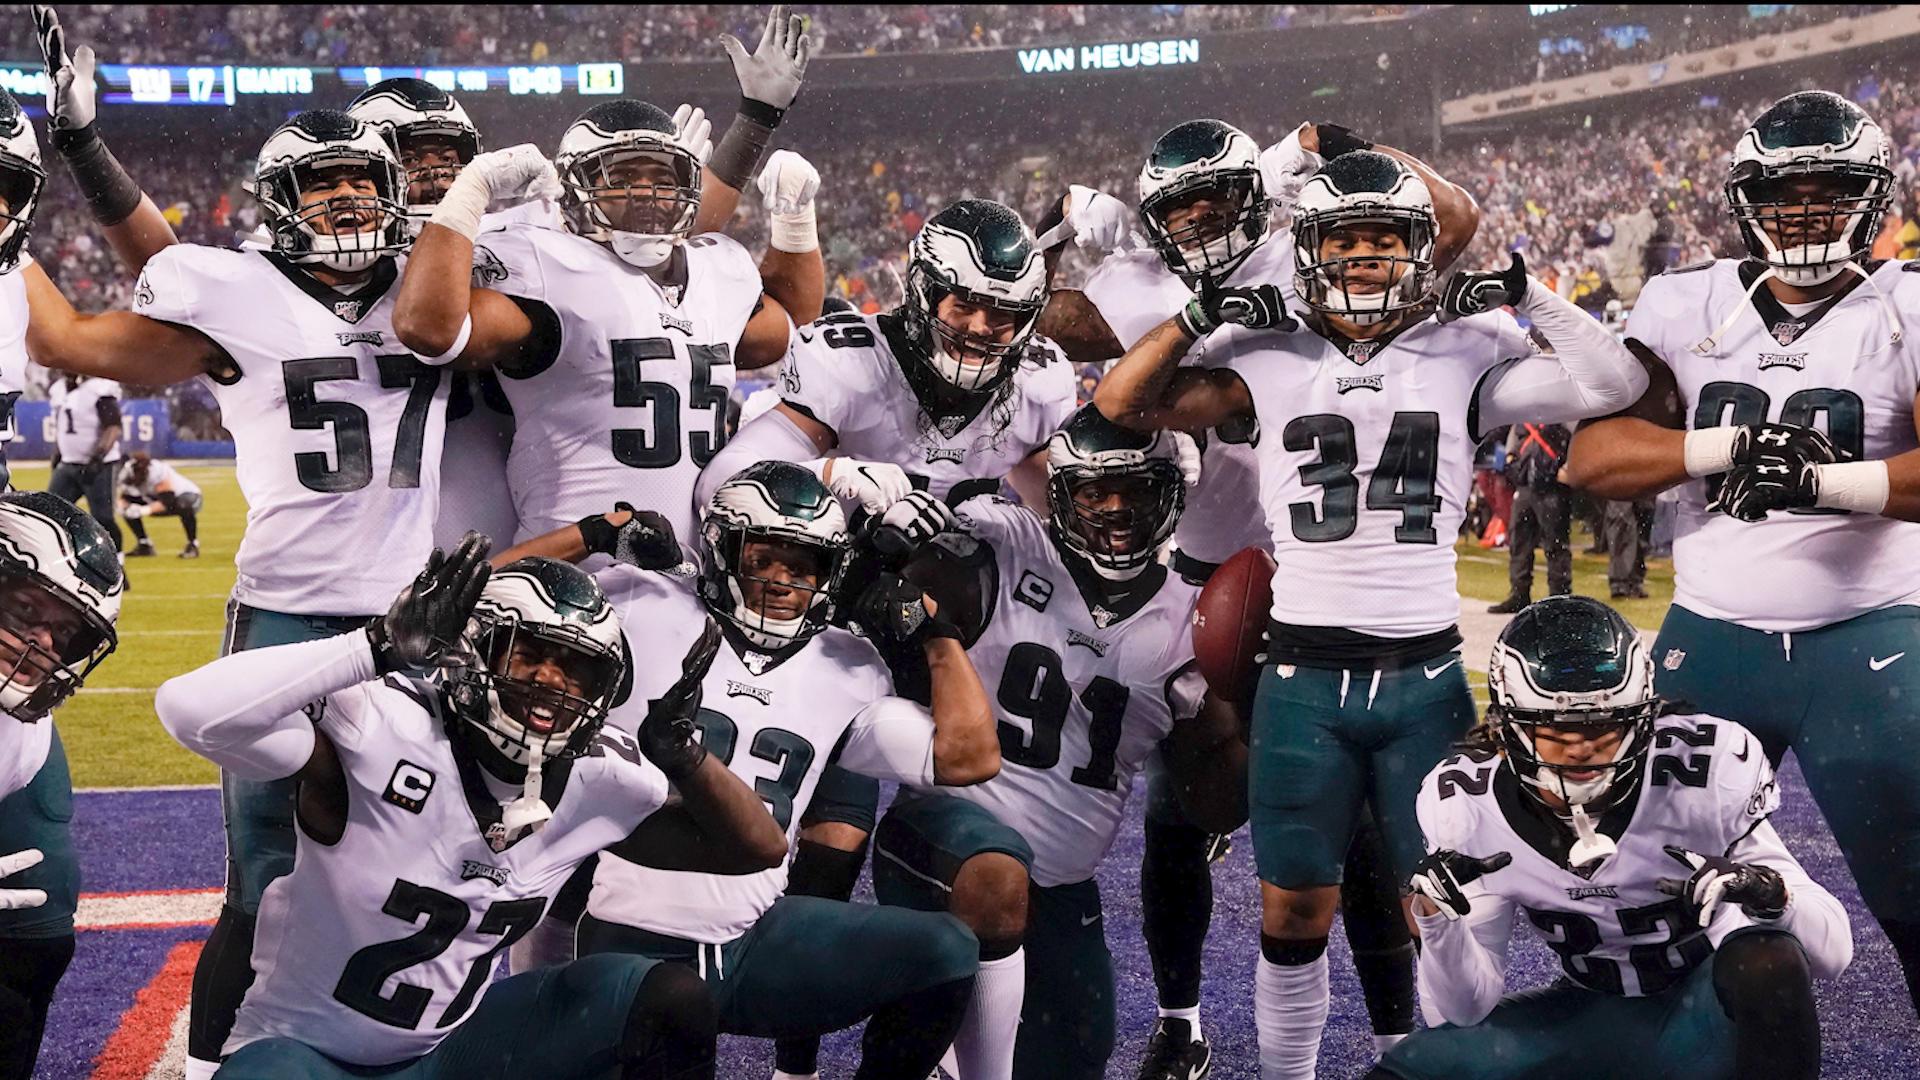 NFL on FOX - #FlyEaglesFly The Philadelphia Eagles are NFC East champions!